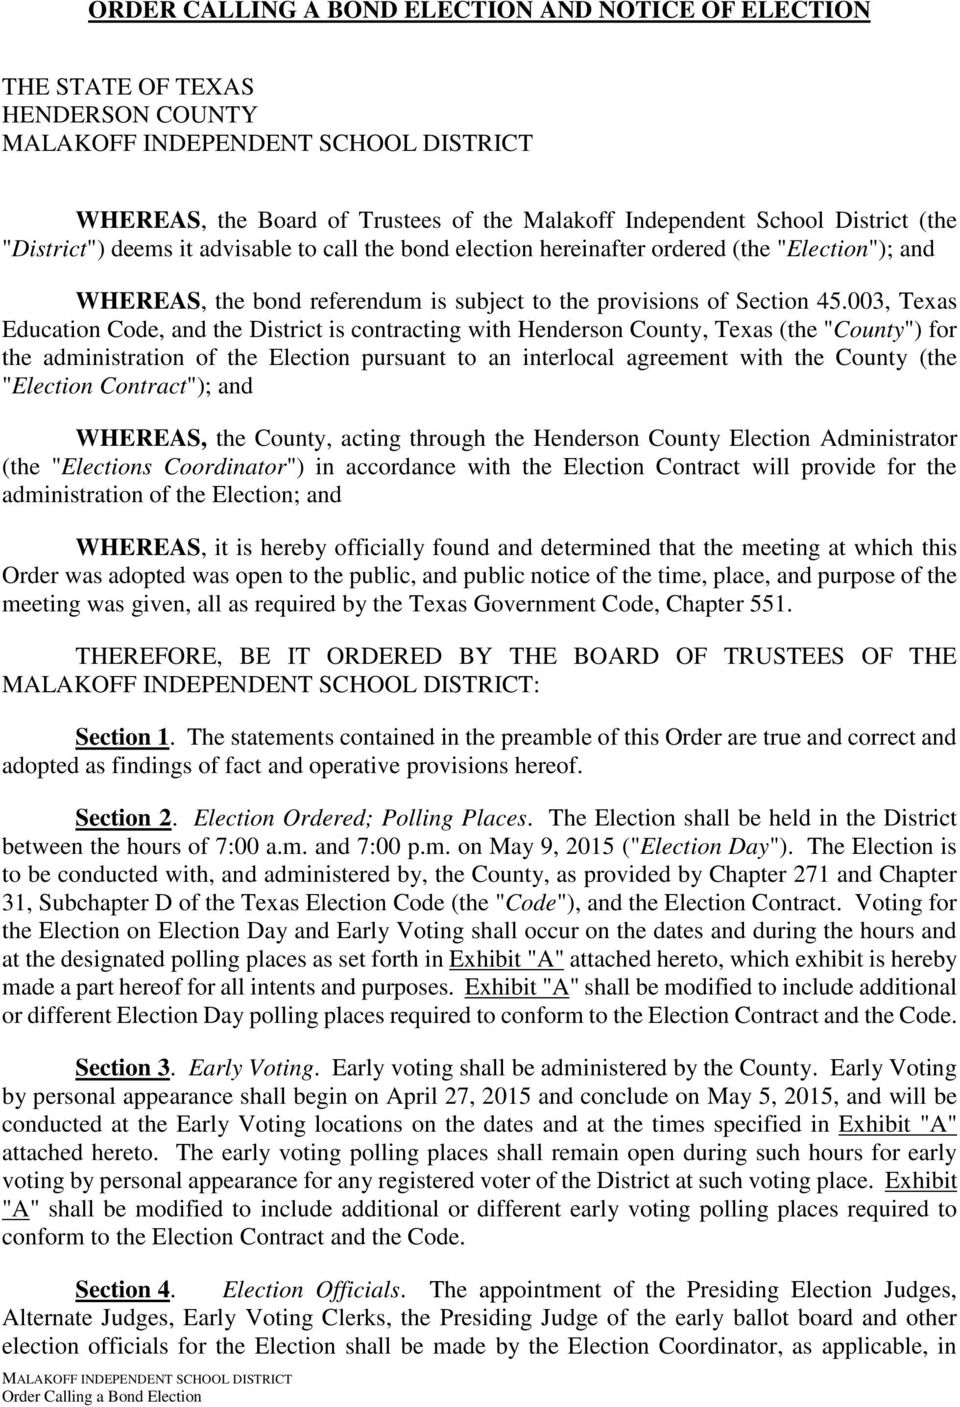 003, Texas Education Code, and the District is contracting with Henderson County, Texas (the "County" for the administration of the Election pursuant to an interlocal agreement with the County (the